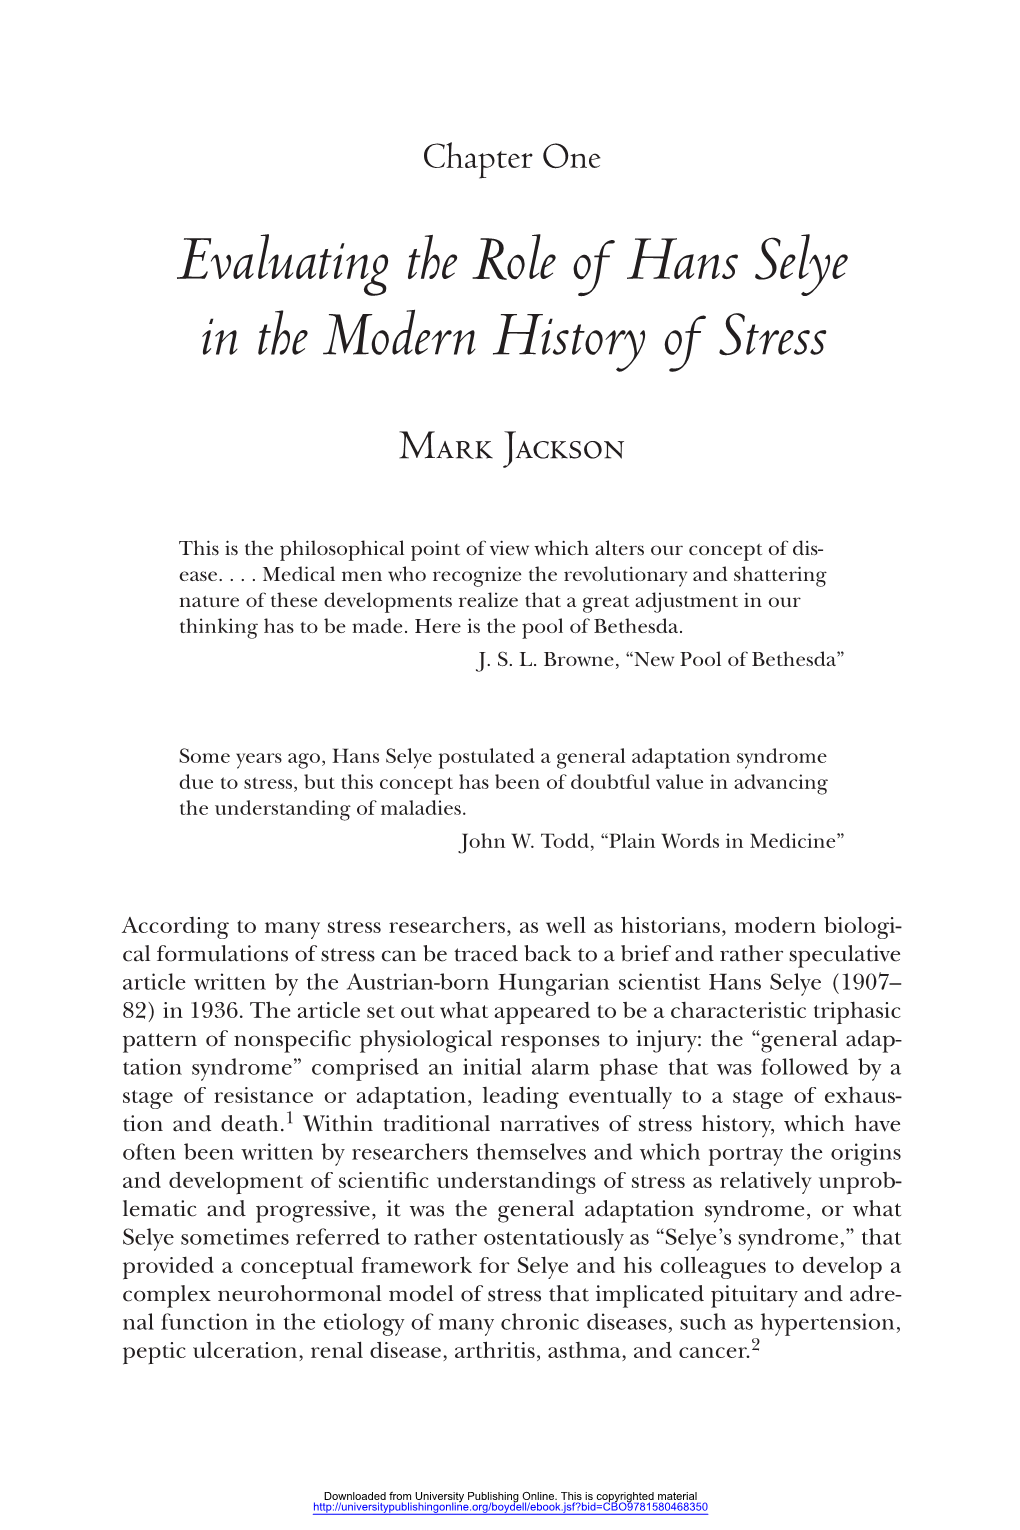 Evaluating the Role of Hans Selye in the Modern History of Stress